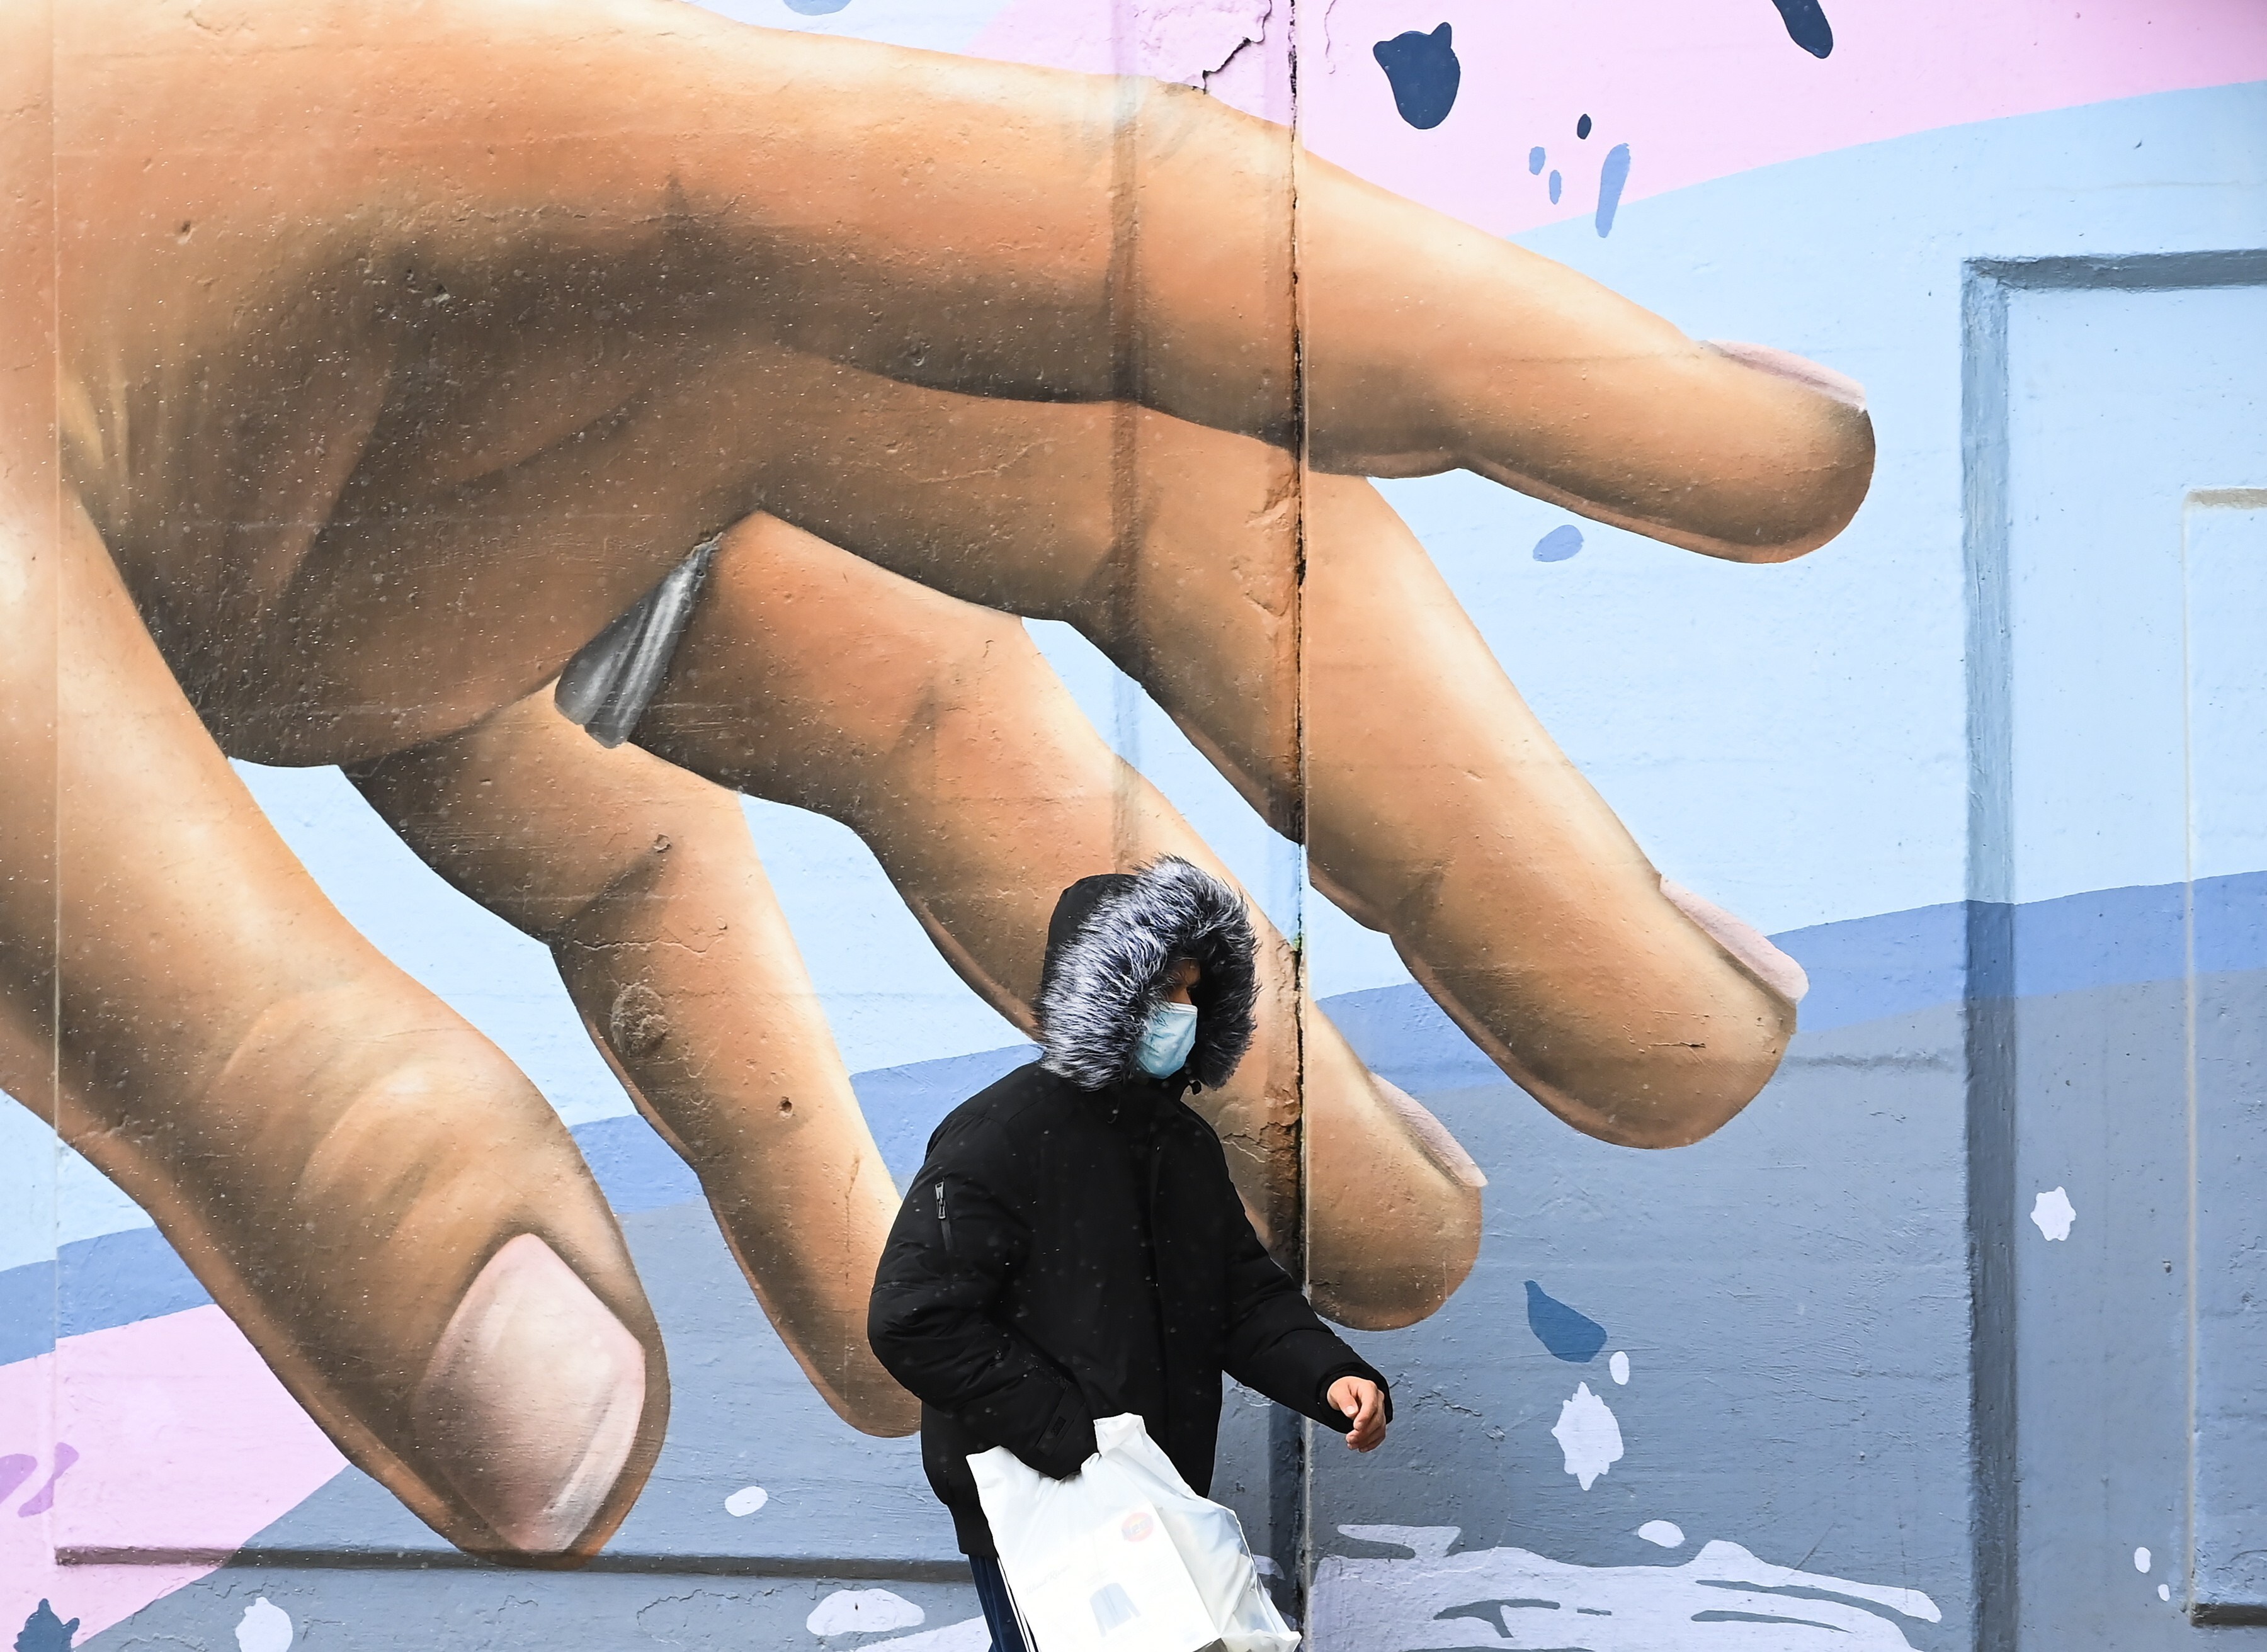 A man wearing a protective mask walks past a mural in Toronto, on December 1, 2020. Canada is one of the wealthy nations that has enough doses to inoculate its population several times over. Photo: The Canadian Press via AP